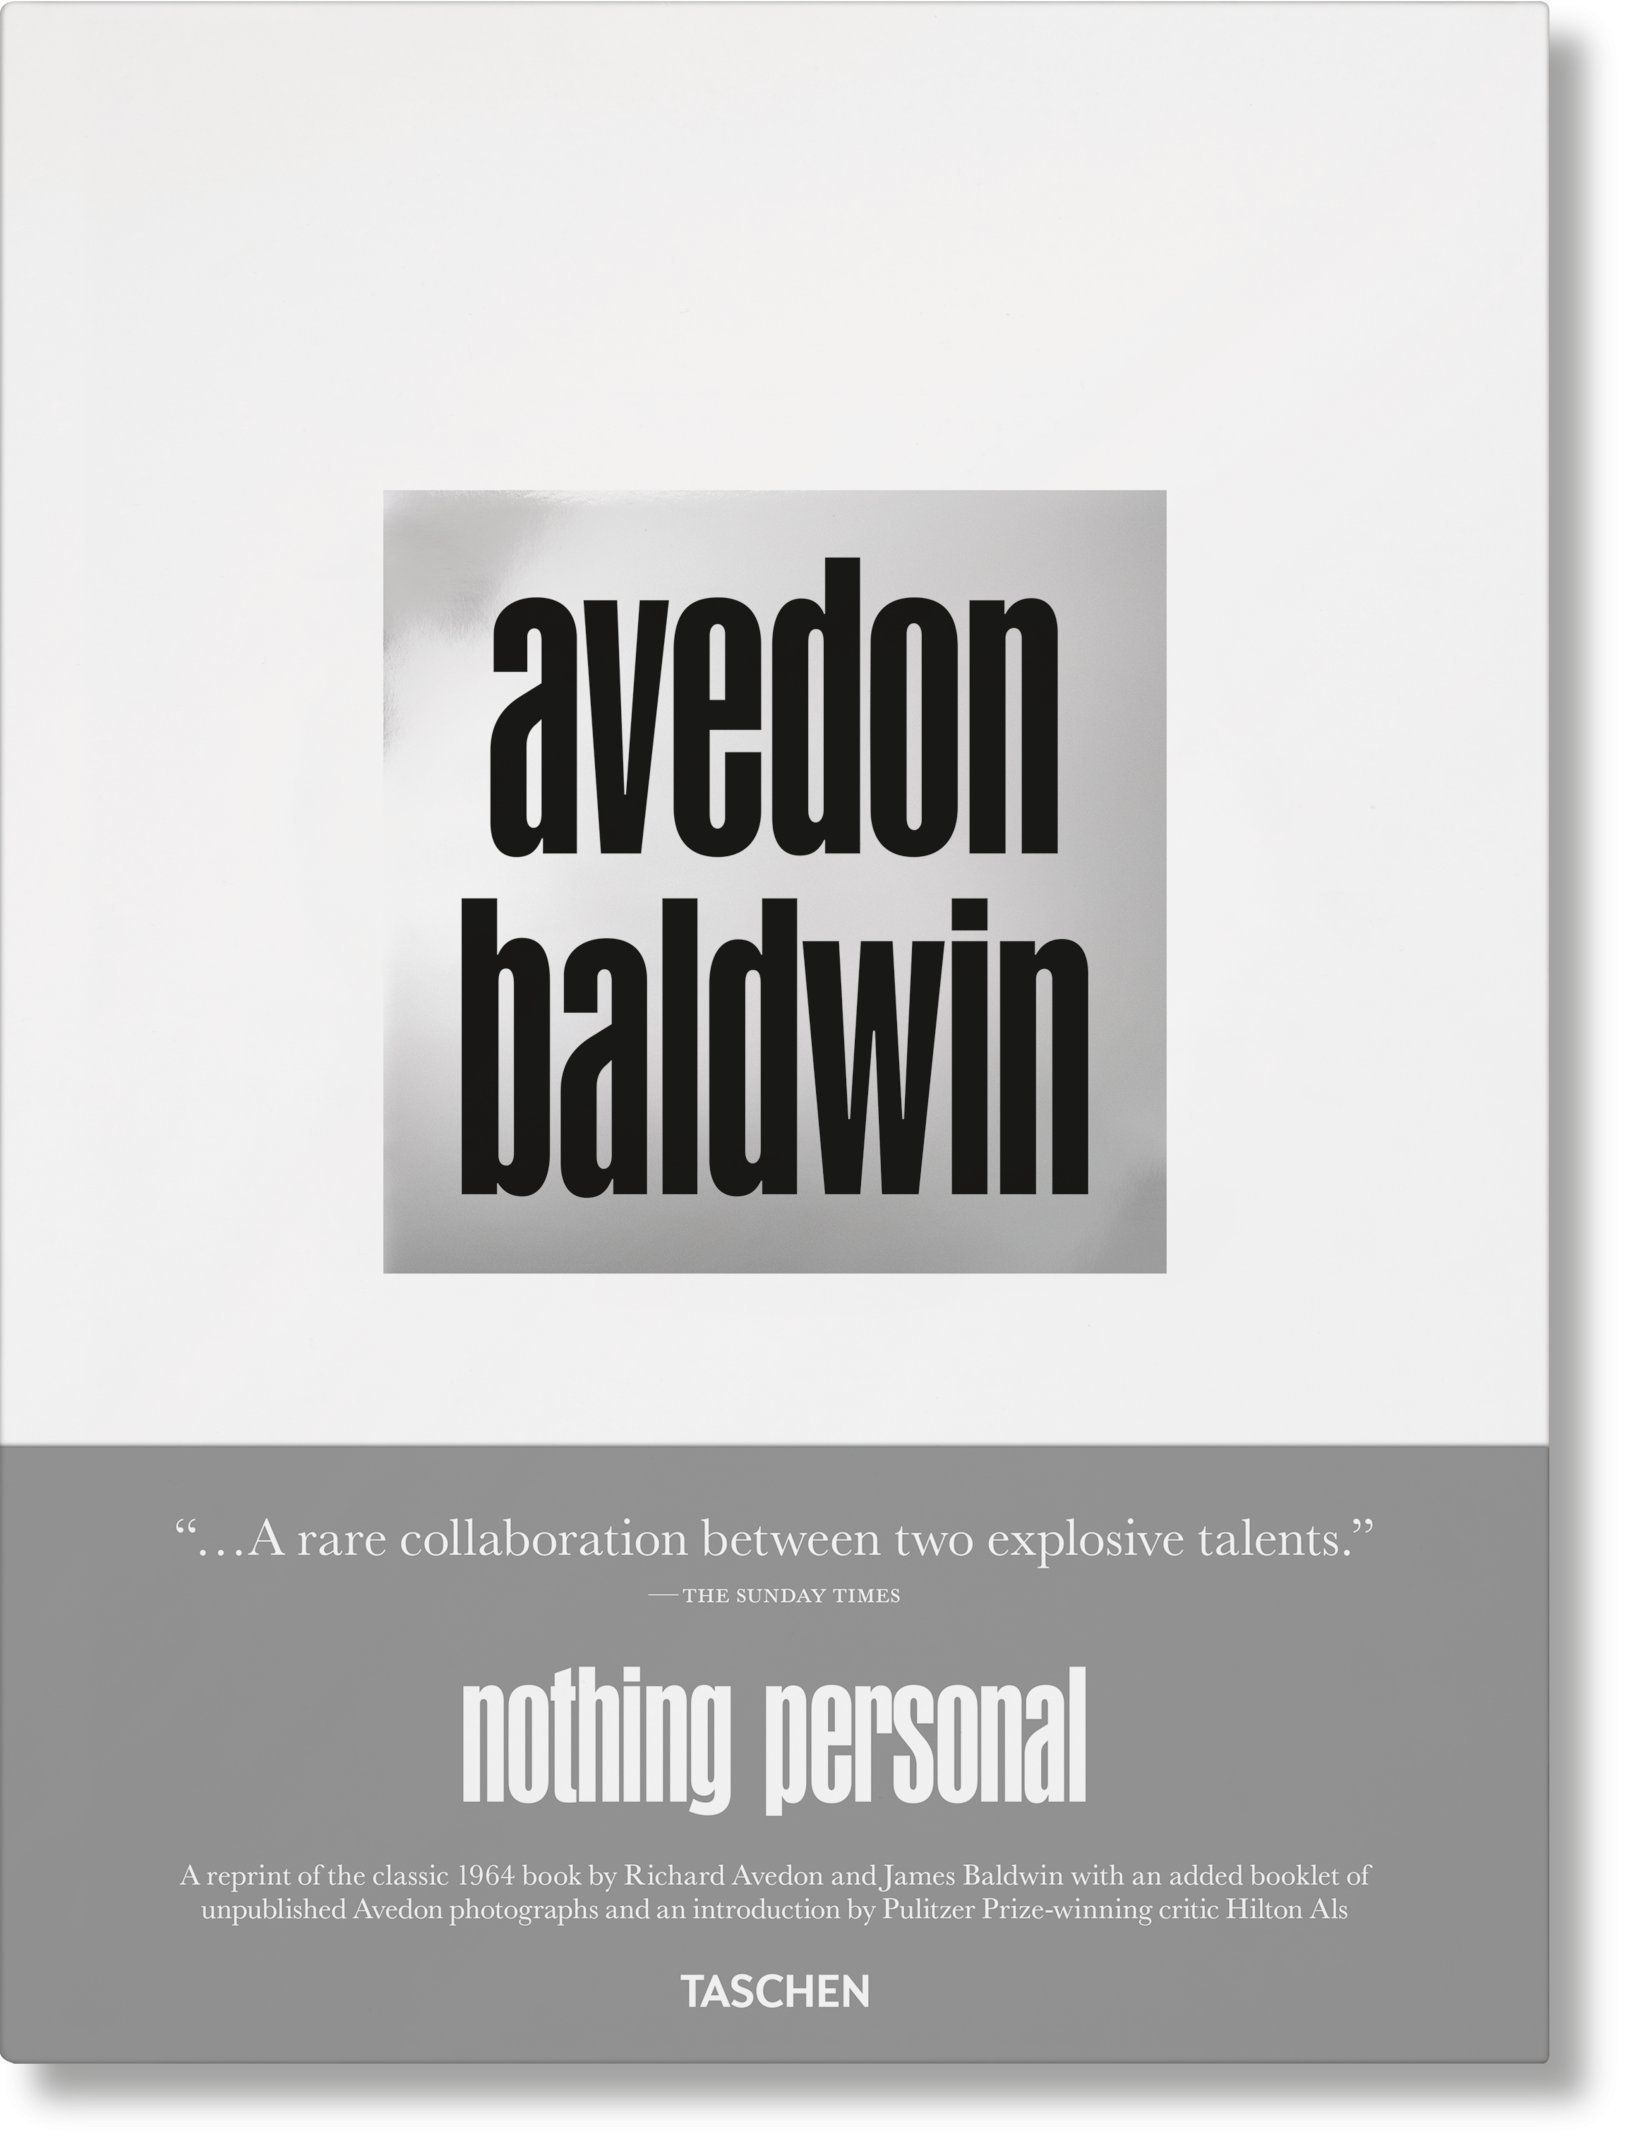 The Terror Is Constant: On Richard Avedon and James Baldwin’s “Nothing Personal”